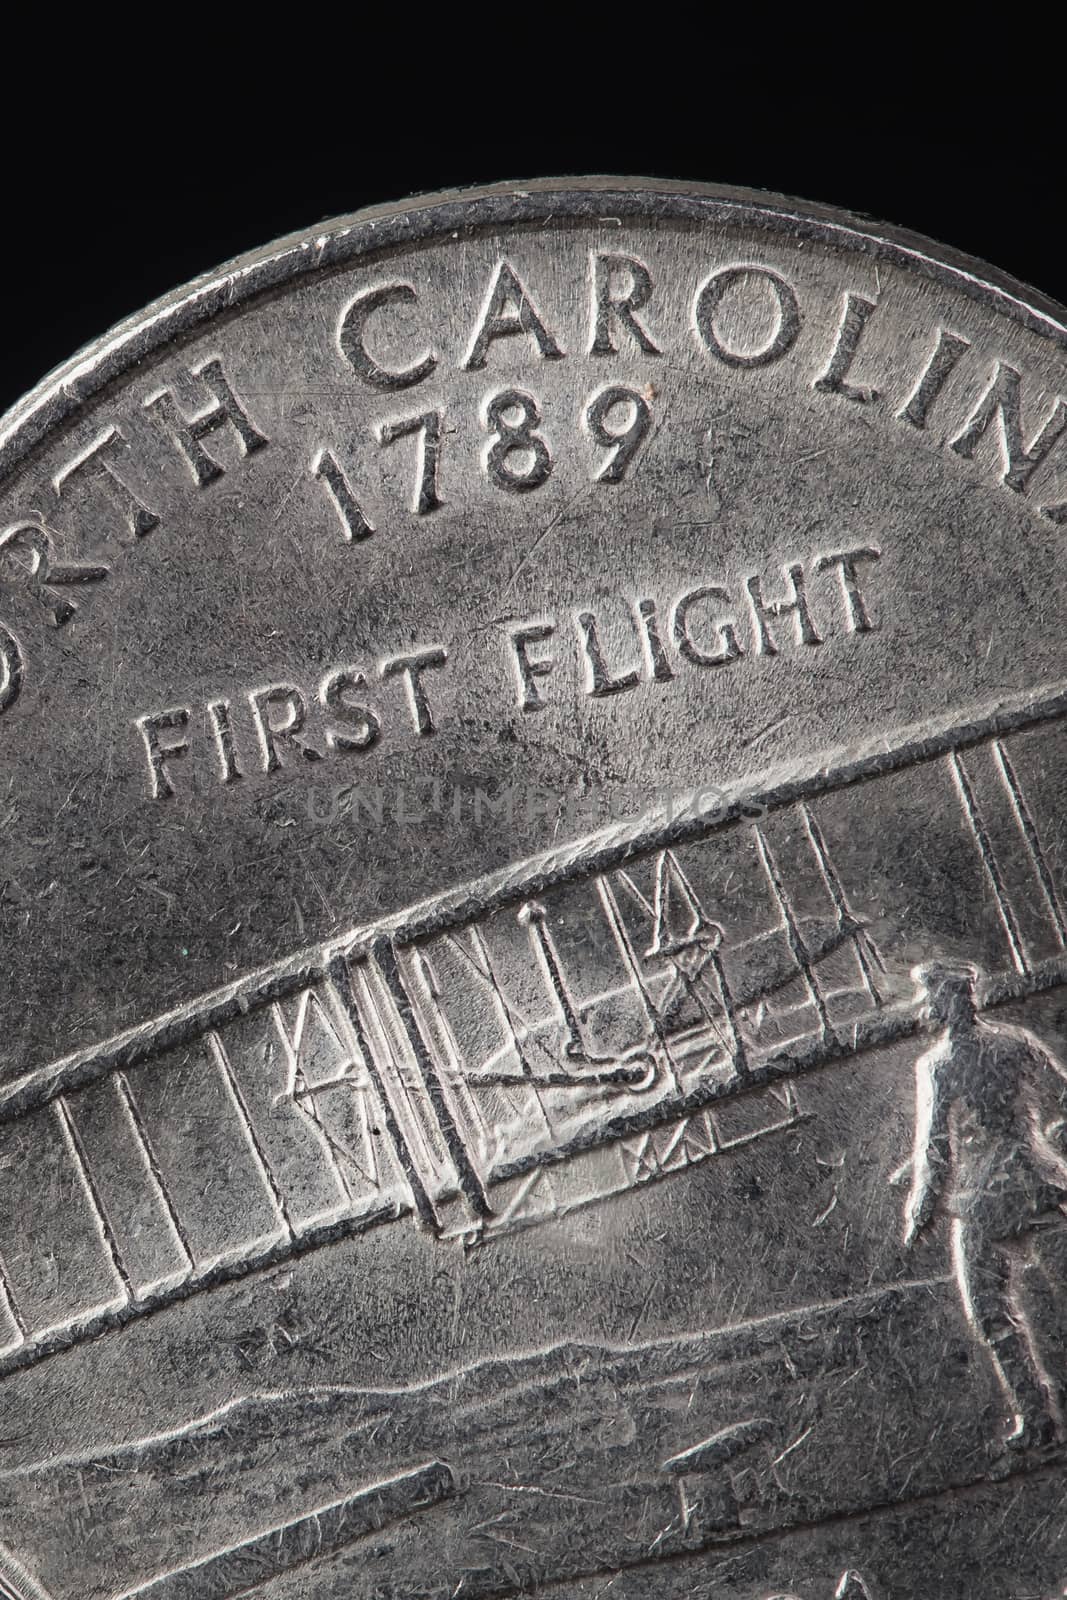 US American coin with wording "First Flight" on black background